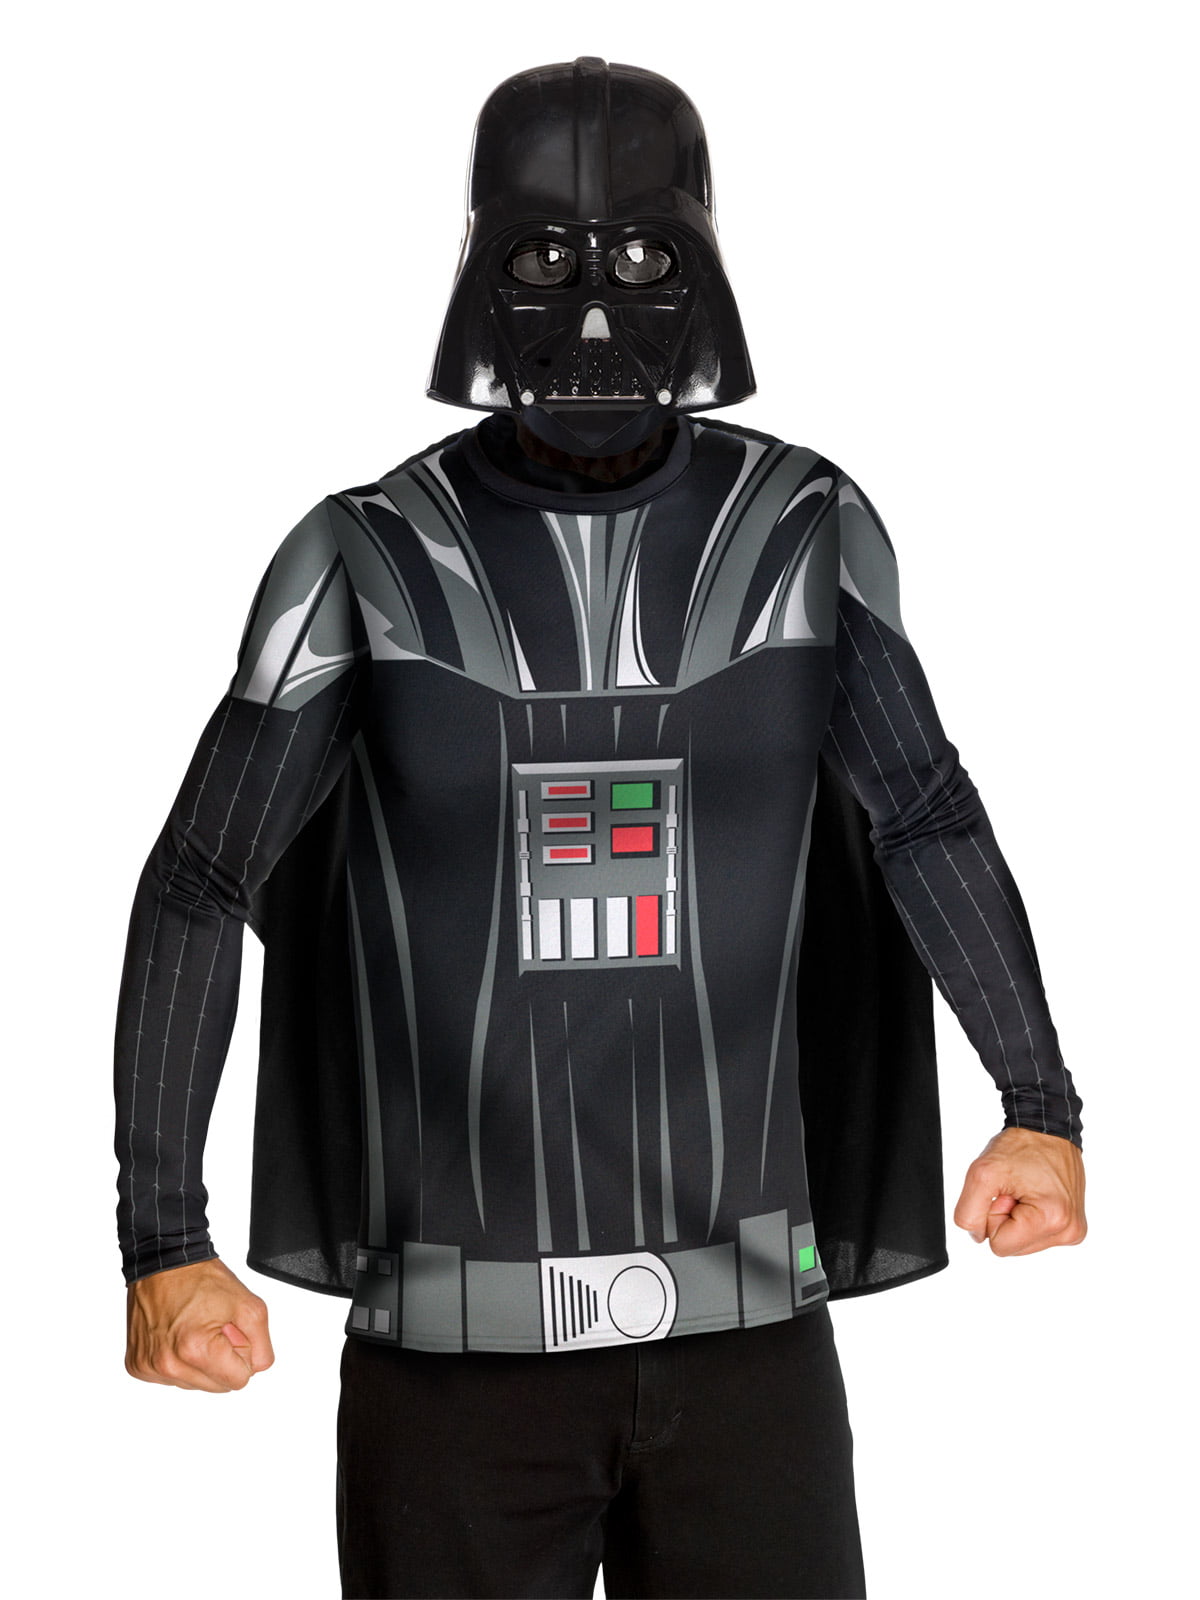 Featured image for “Darth Vader Long Sleeve Top”